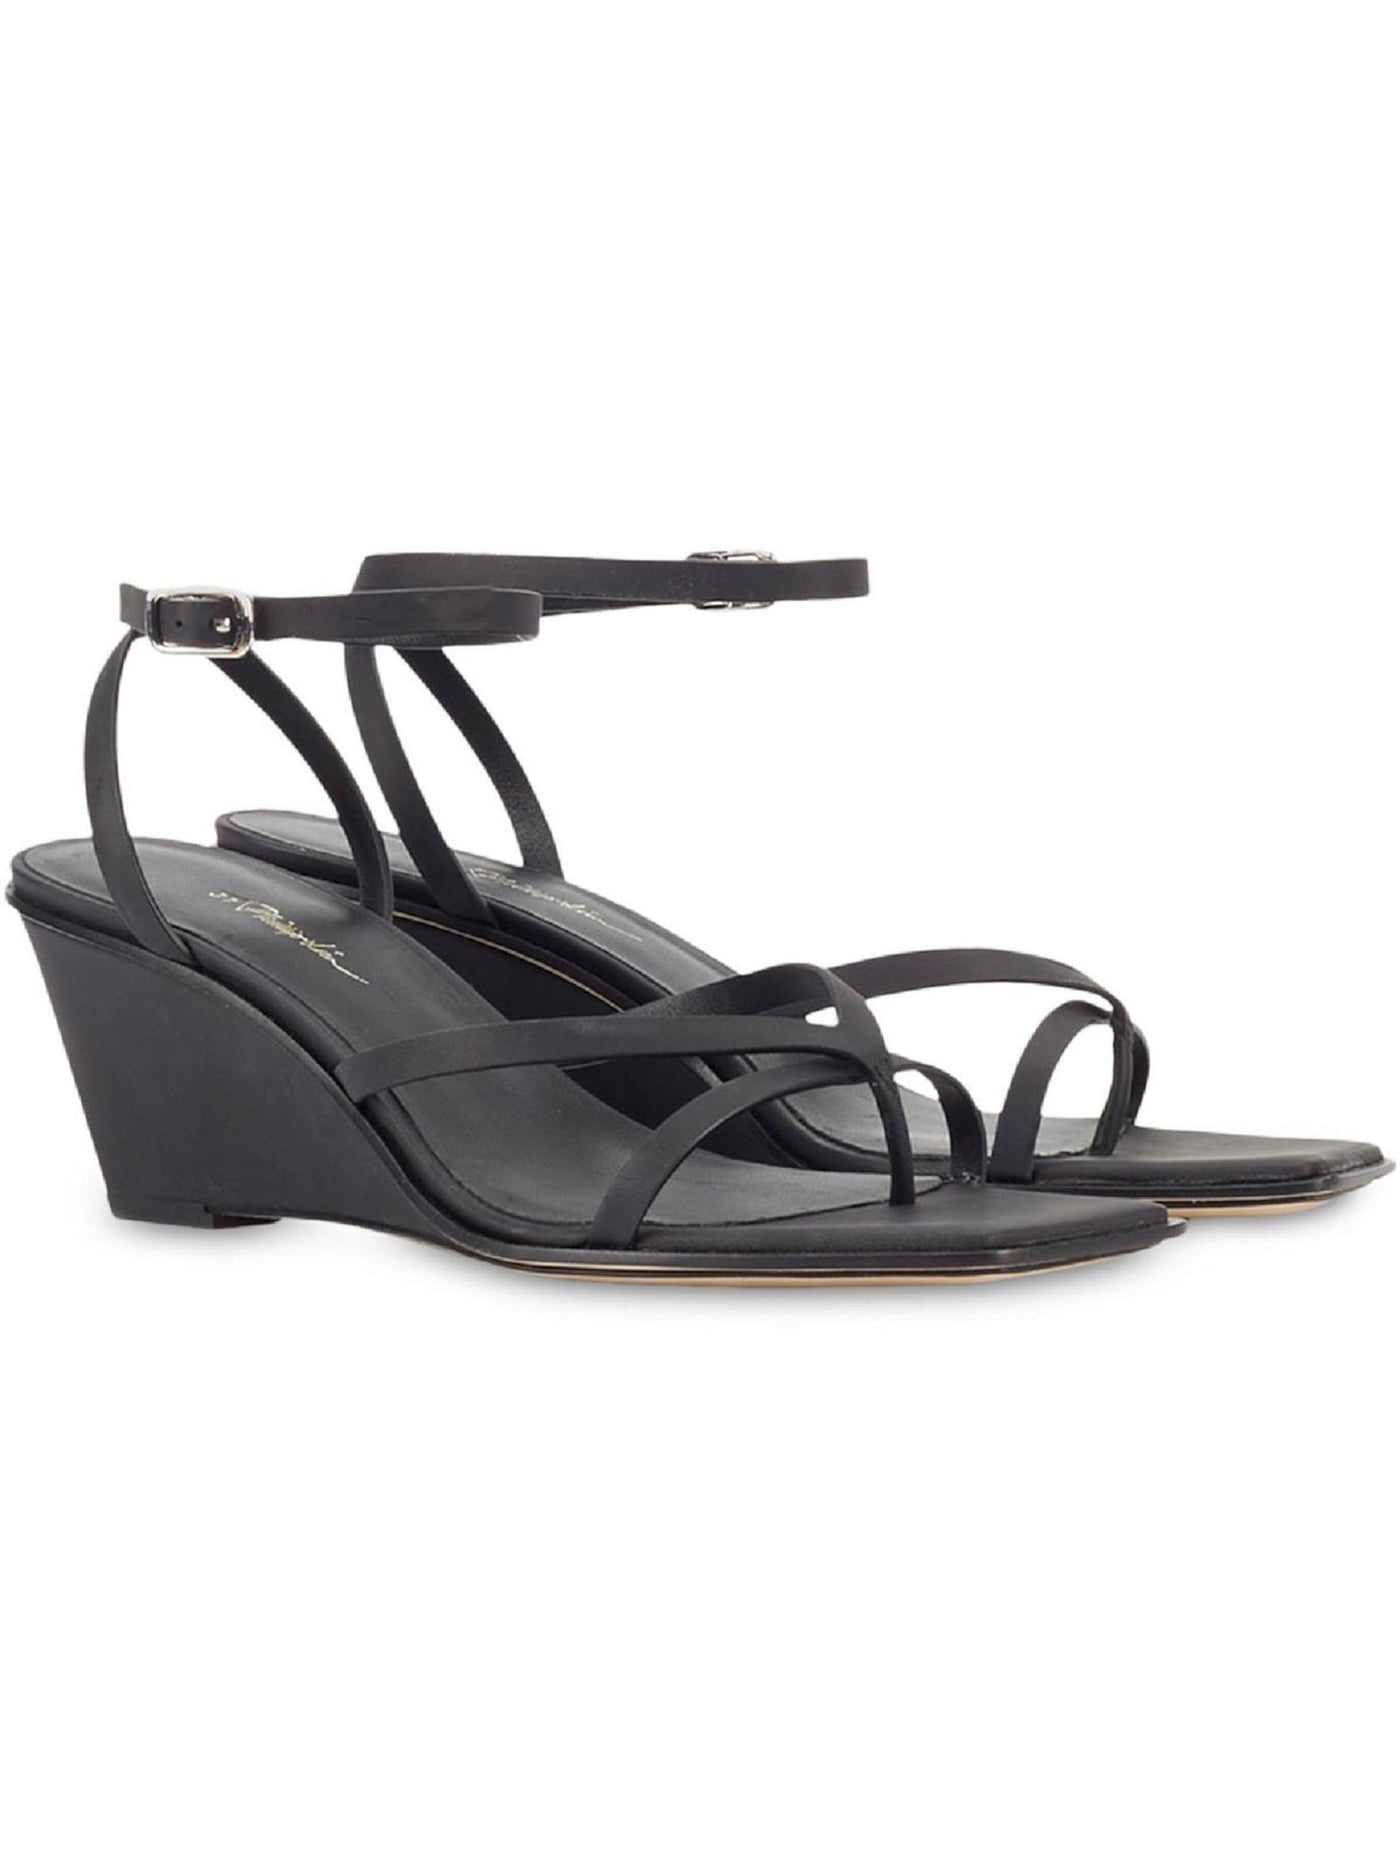 3.1 PHILLIP LIM Womens Black Goring Strappy Ankle Strap Adjustable Laura Square Toe Wedge Buckle Leather Dress Thong Sandals Shoes 37